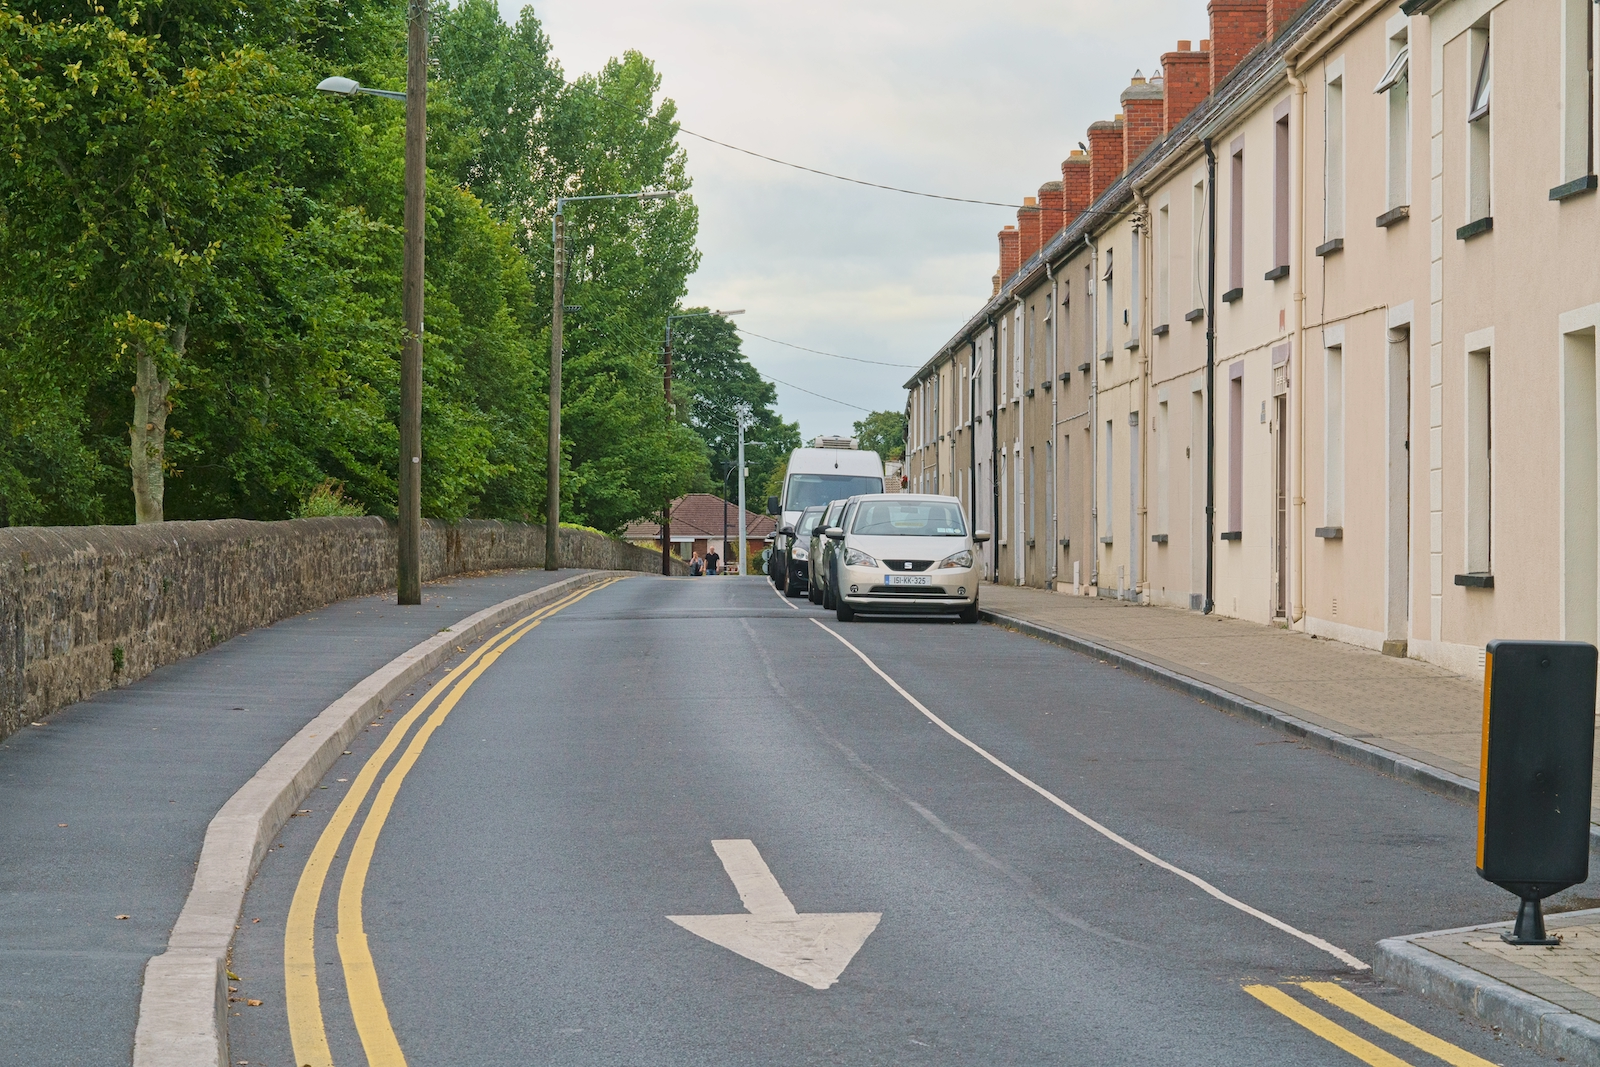 michael-street-in-the-city-of-kilkenny-[august-2018]-227094-excellent